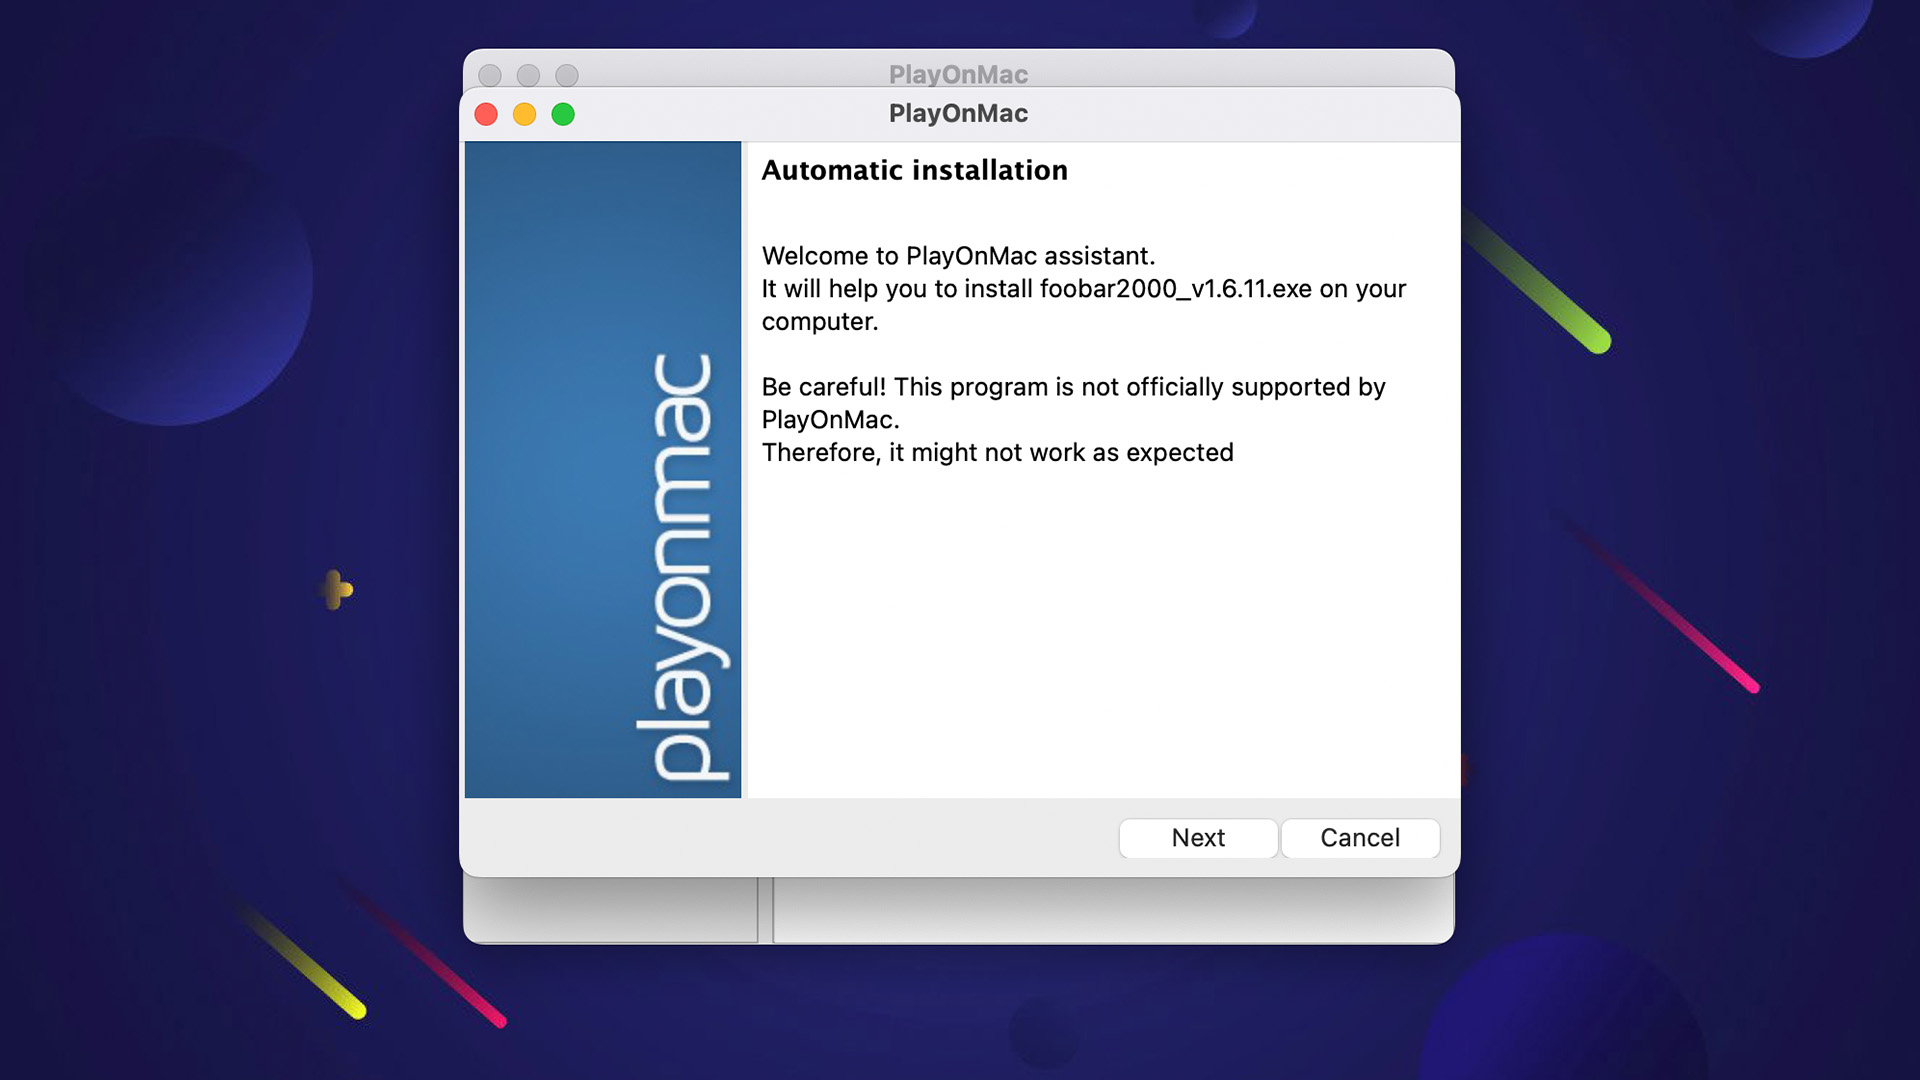 PlayOnMac install executable file